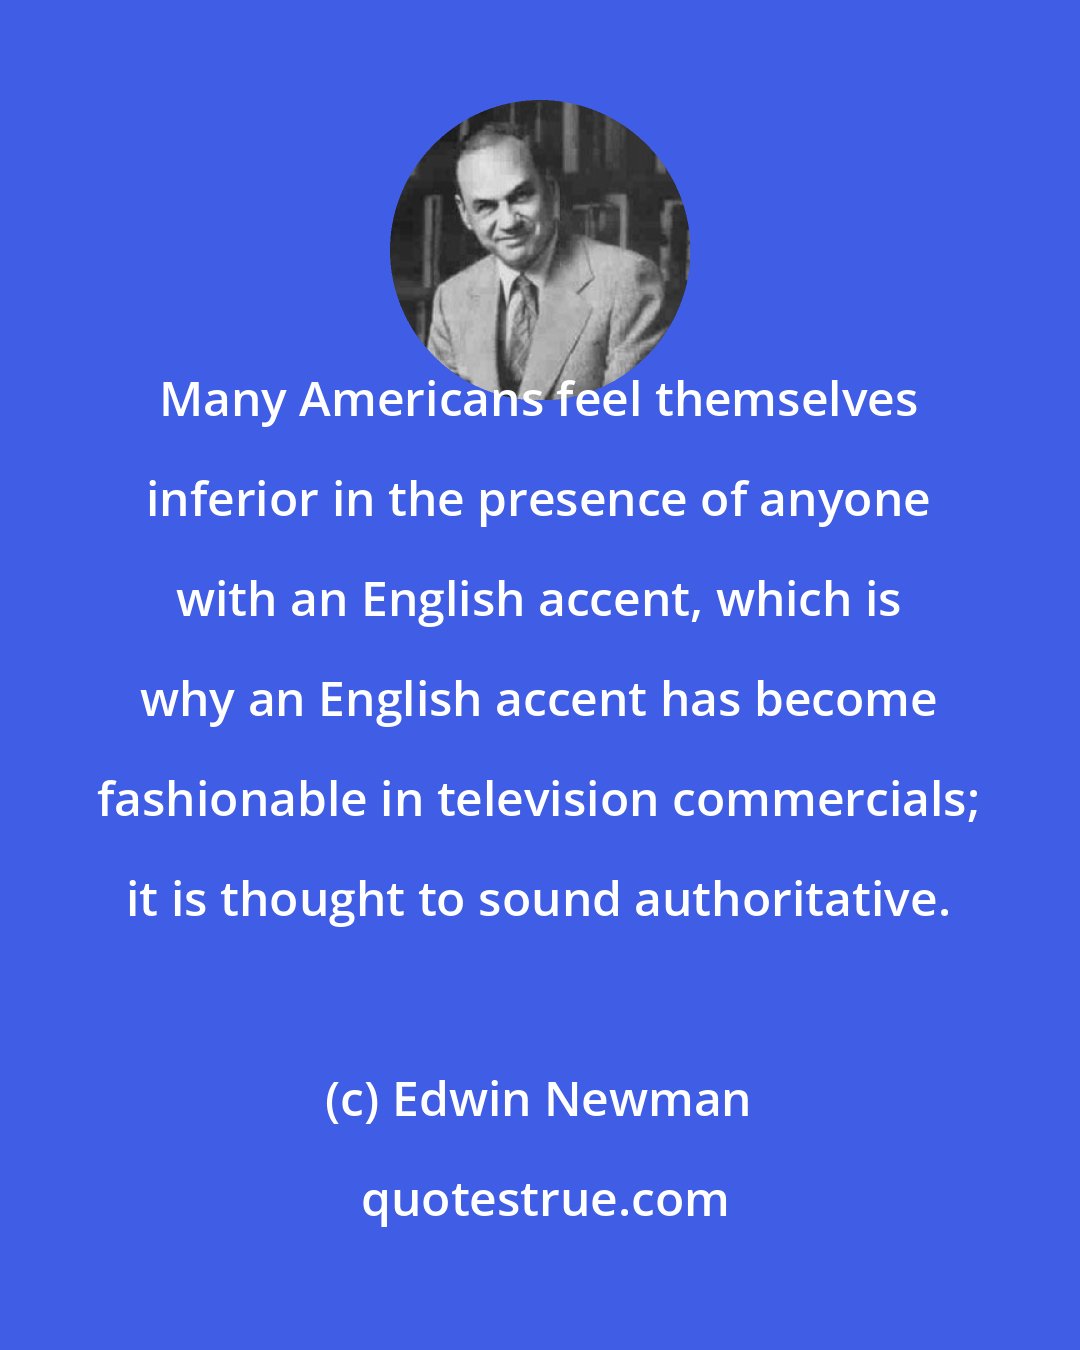 Edwin Newman: Many Americans feel themselves inferior in the presence of anyone with an English accent, which is why an English accent has become fashionable in television commercials; it is thought to sound authoritative.